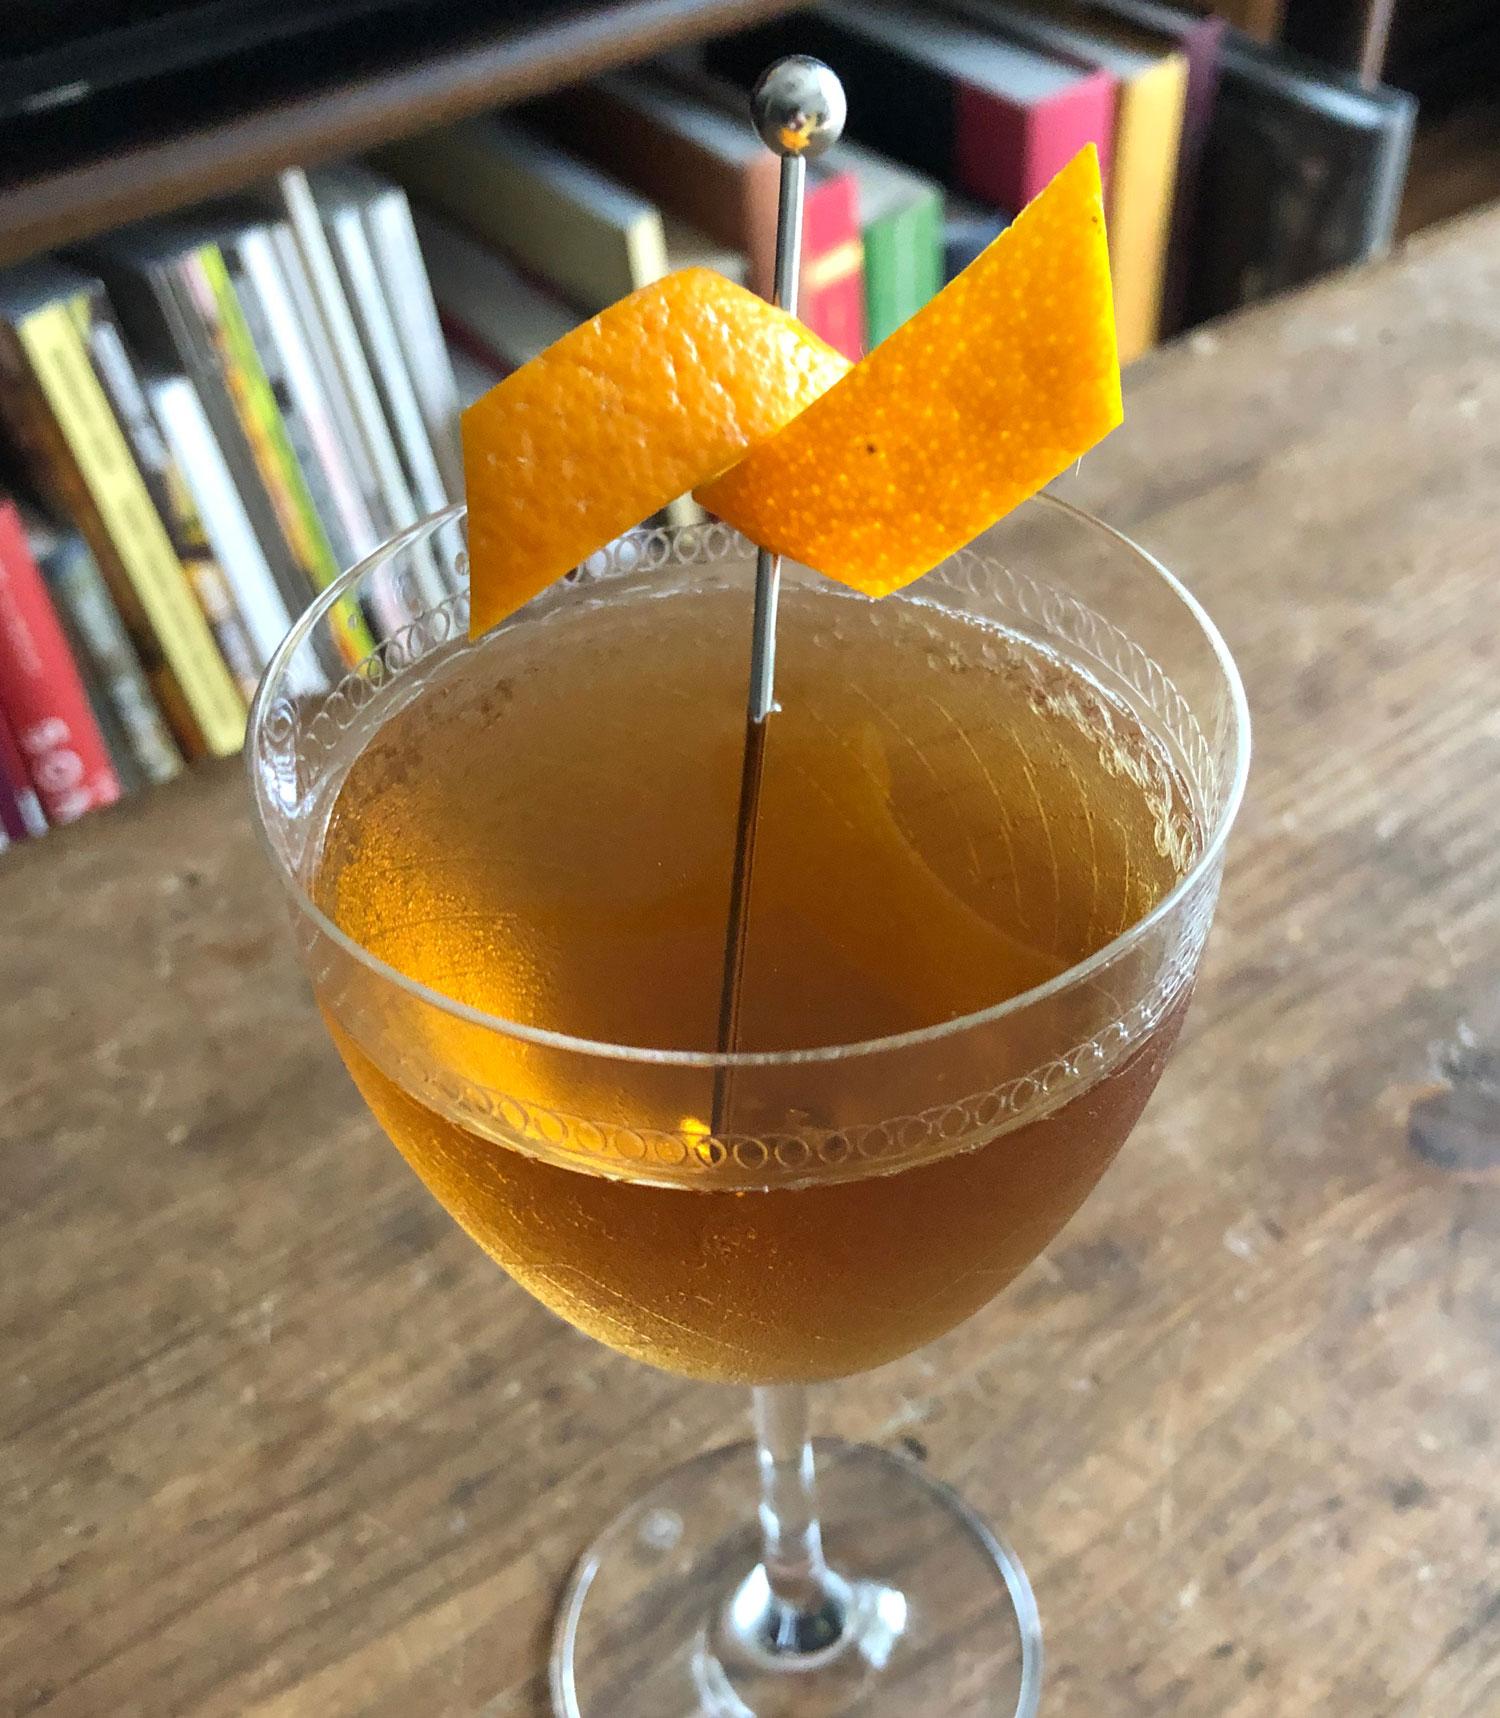 An example of the Bobby Burns, the mixed drink (drink) featuring scotch whisky, Dolin Rouge Vermouth de Chambéry, Bénédictine, and orange twist; photo by Lee Edwards